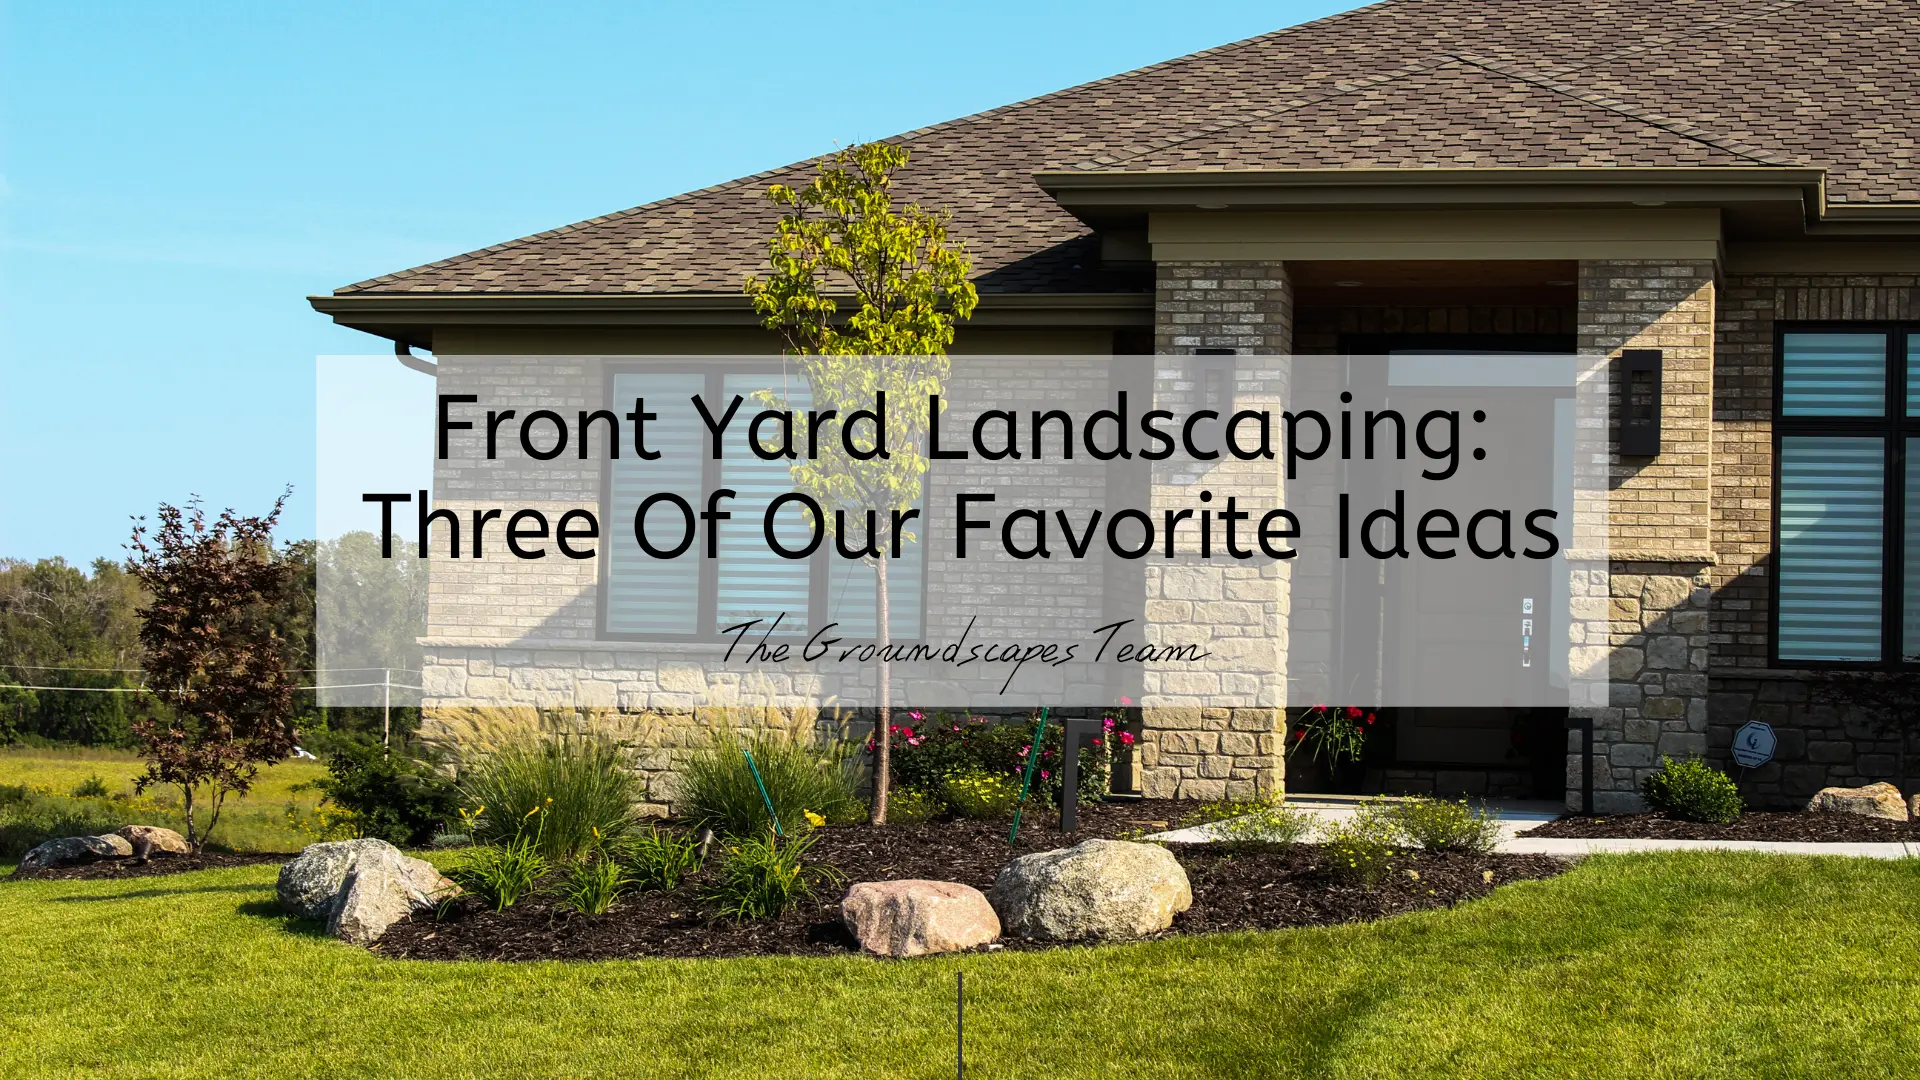 Front Yard Landscaping: Three Of Our Favorite Ideas